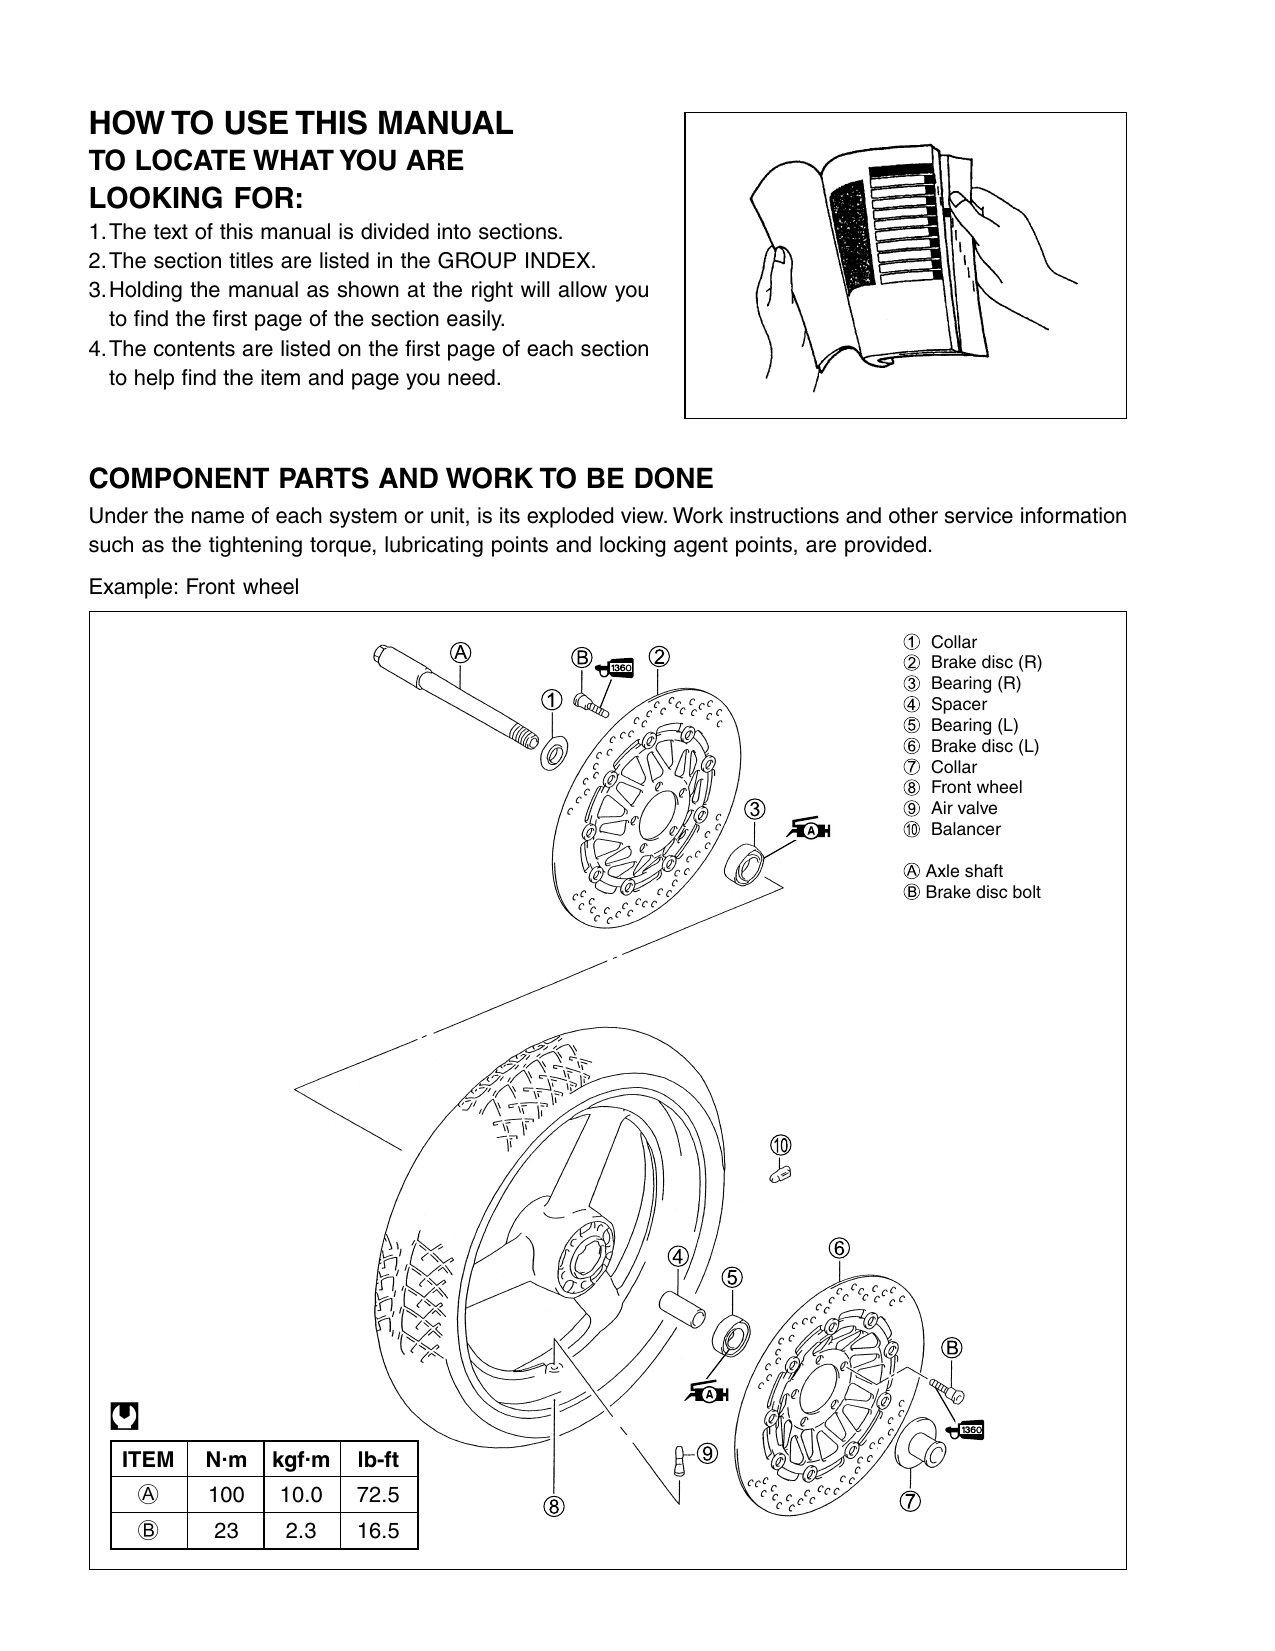 2001-2002 Suzuki GSF1200, GSF1200S service manual Preview image 3